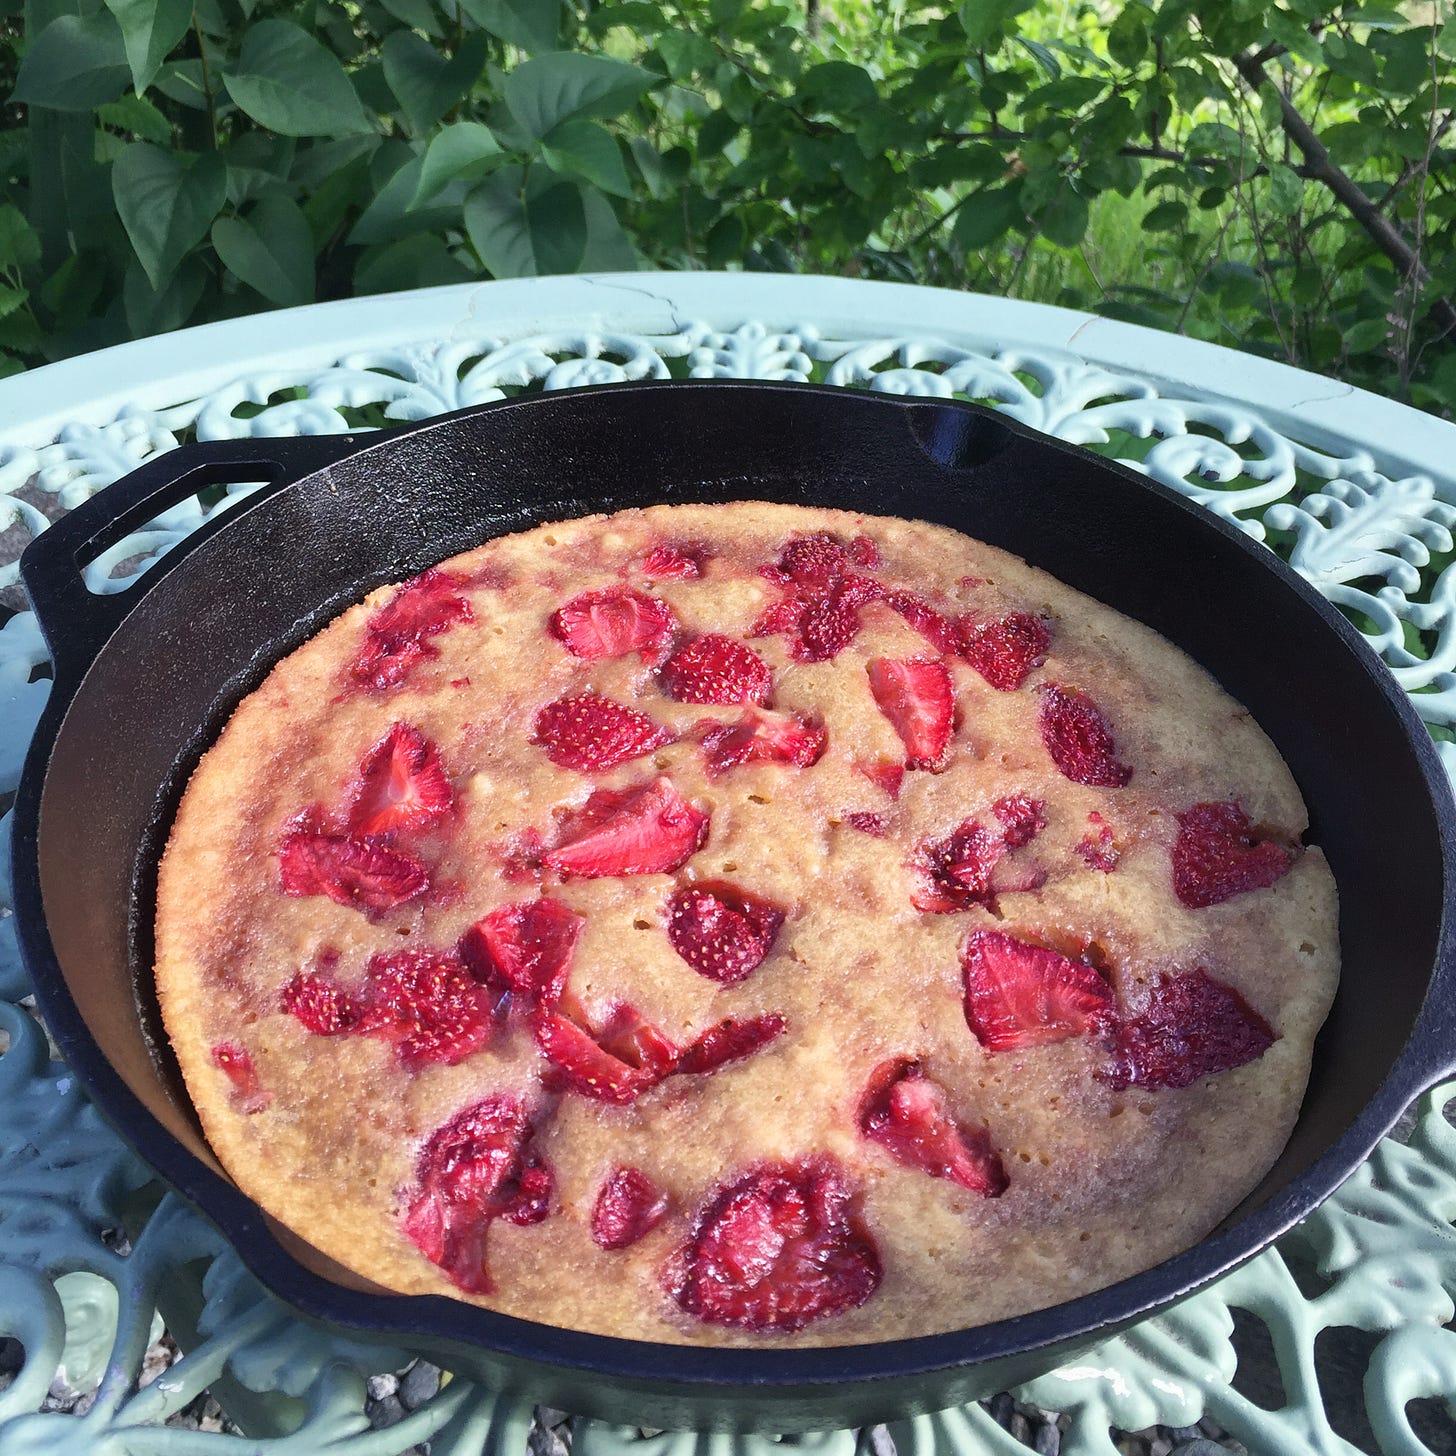 a cast iron pan on top of a wrough-iron table. In the pan is a golden cake with pieces of strawberry sunk into the top.